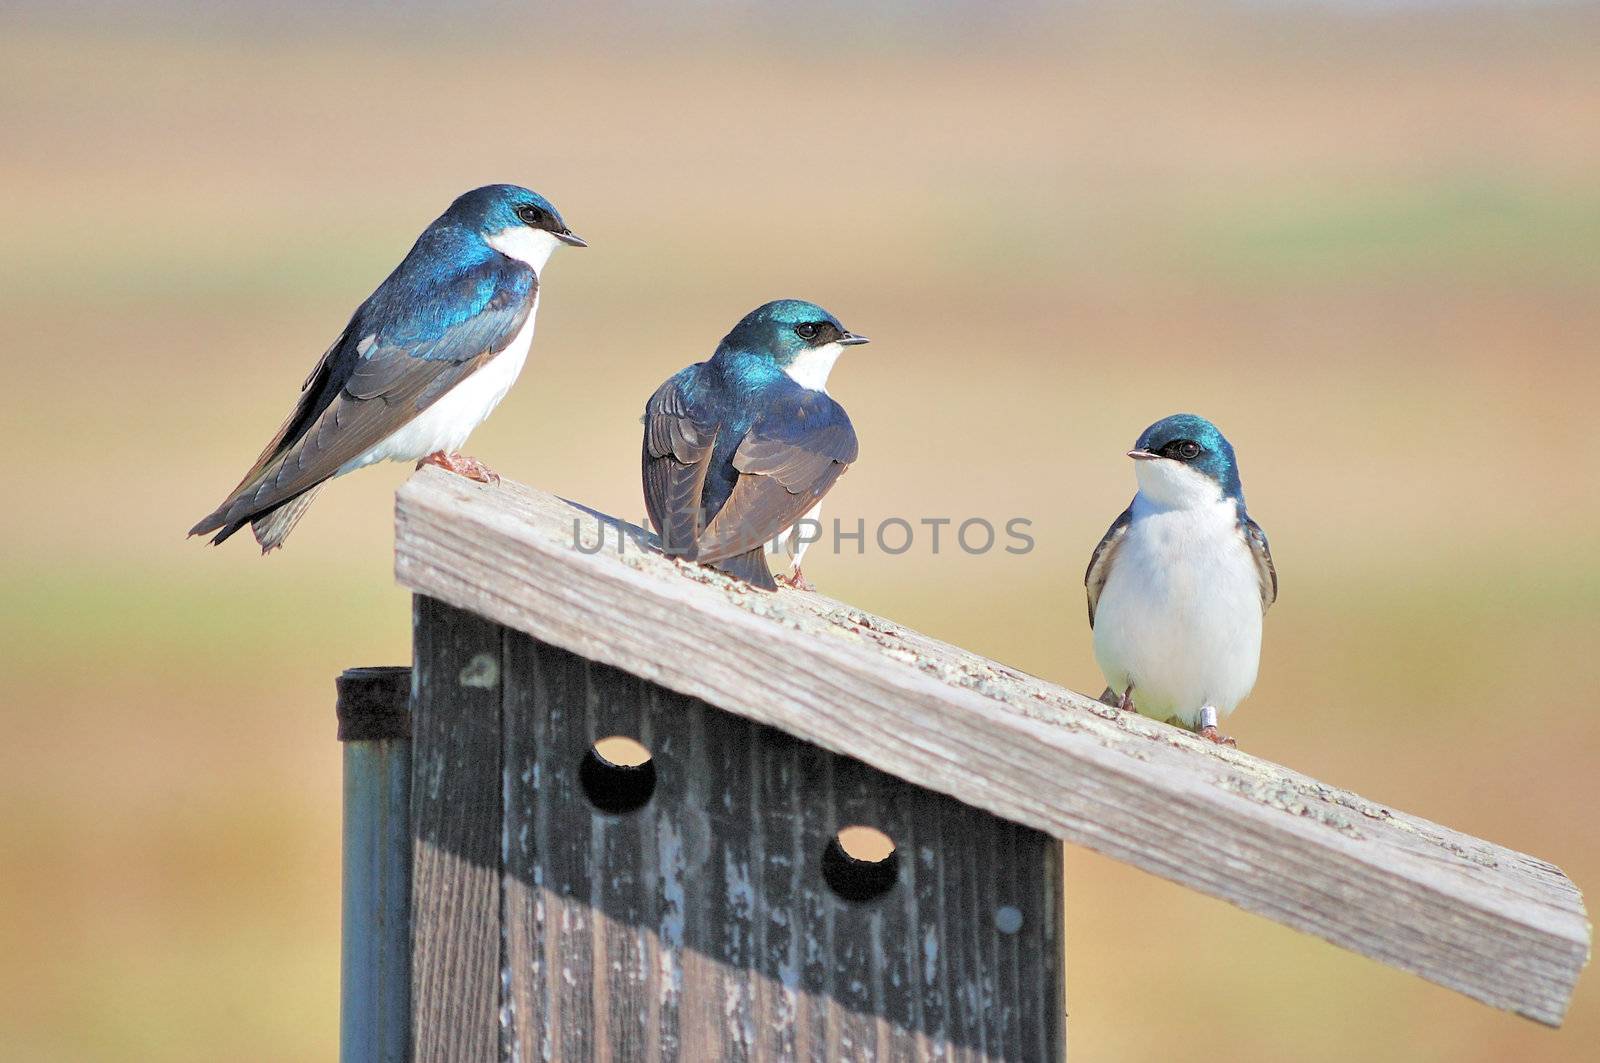 A trio of tree swallows perched on a nesting box singing to each other.